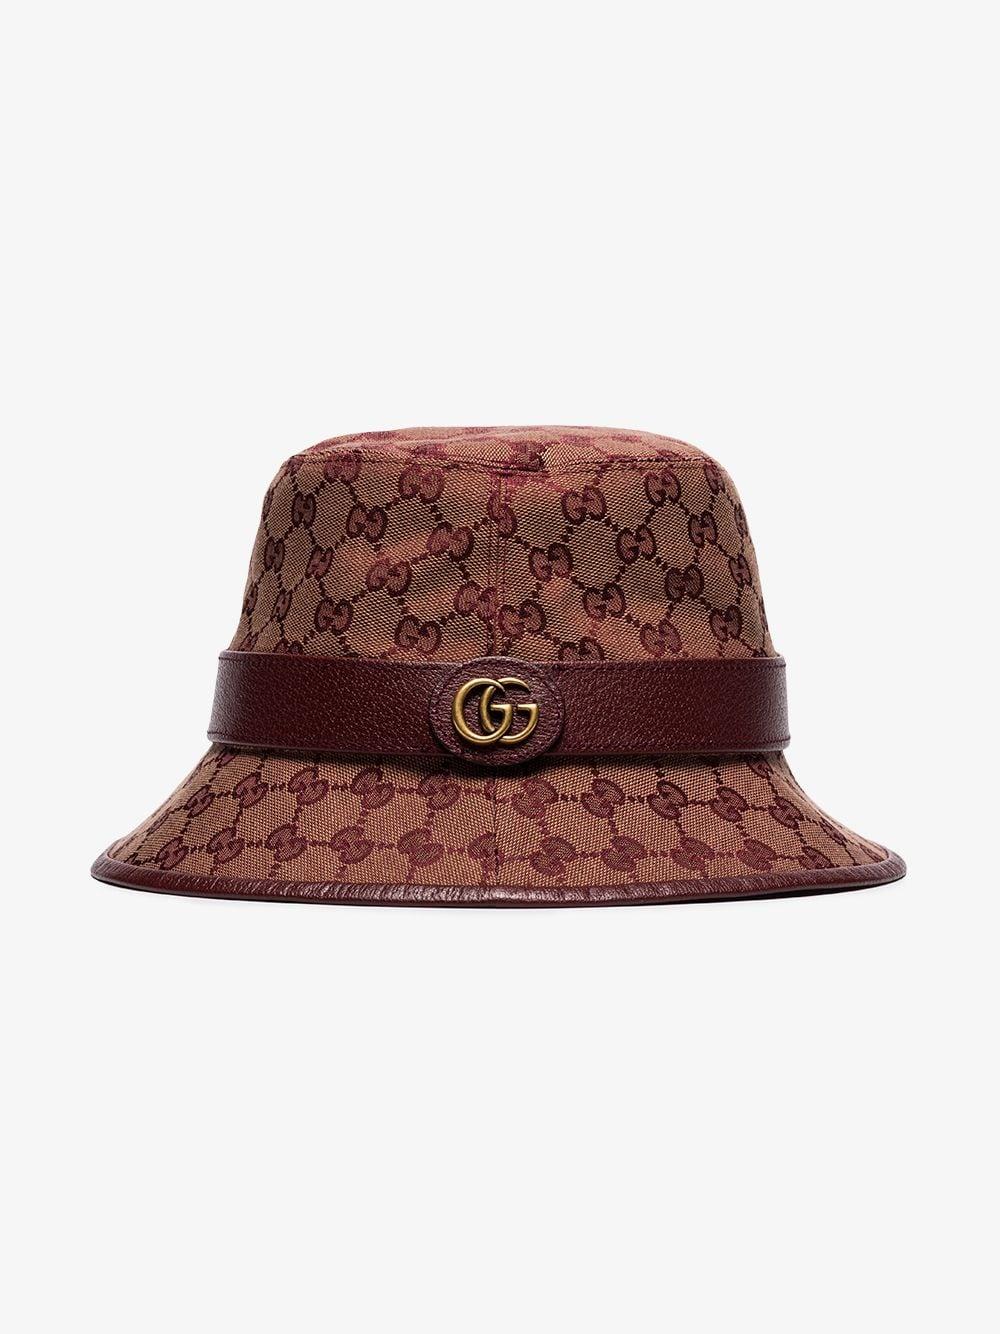 Gucci Brown GG Canvas Bucket Hat in Red for Men - Lyst